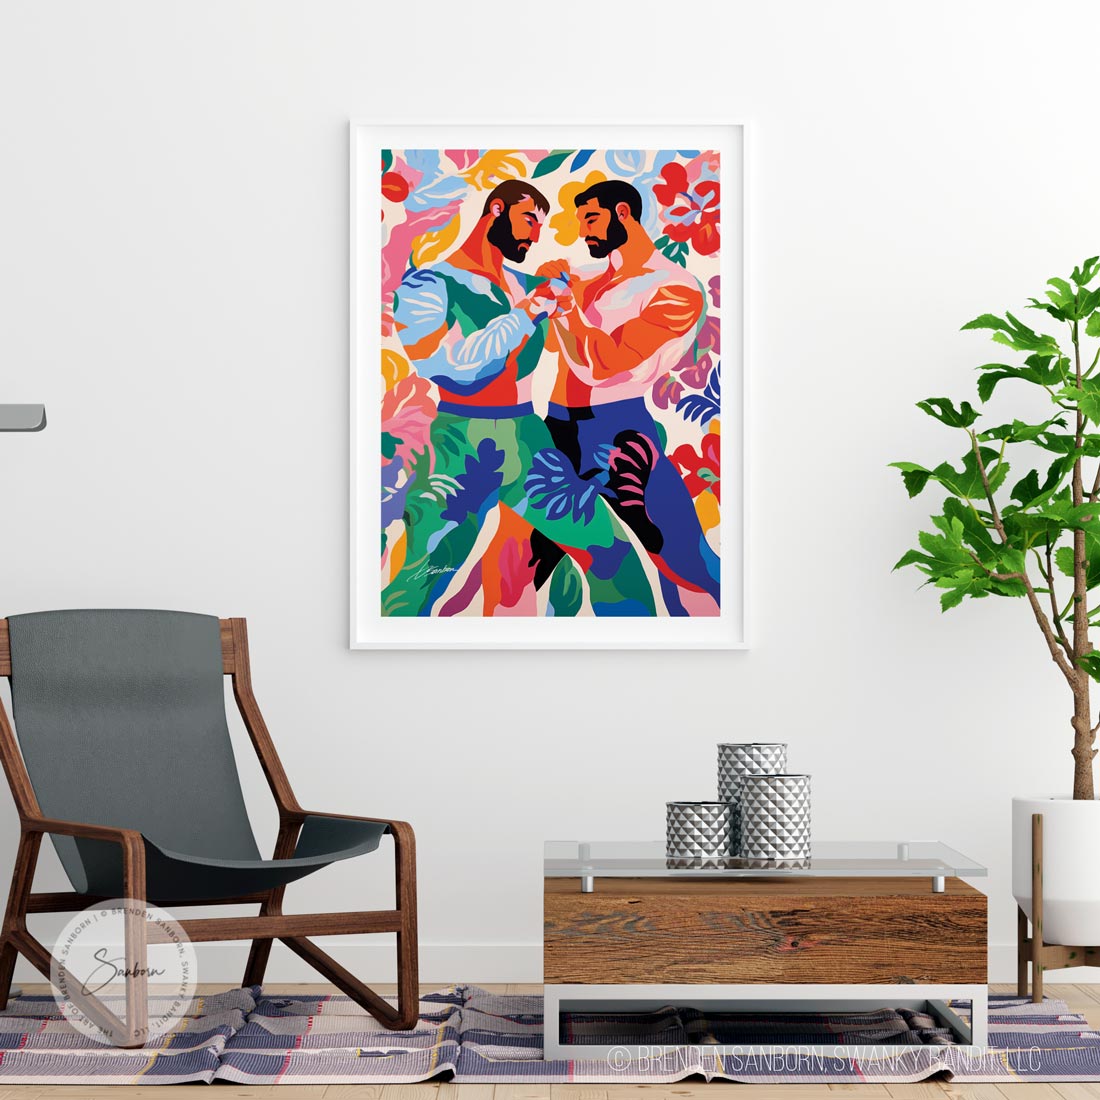 Intimate Moment of Male Lovers with Thick Beards Amidst Floral Paradise - Giclee Art Print